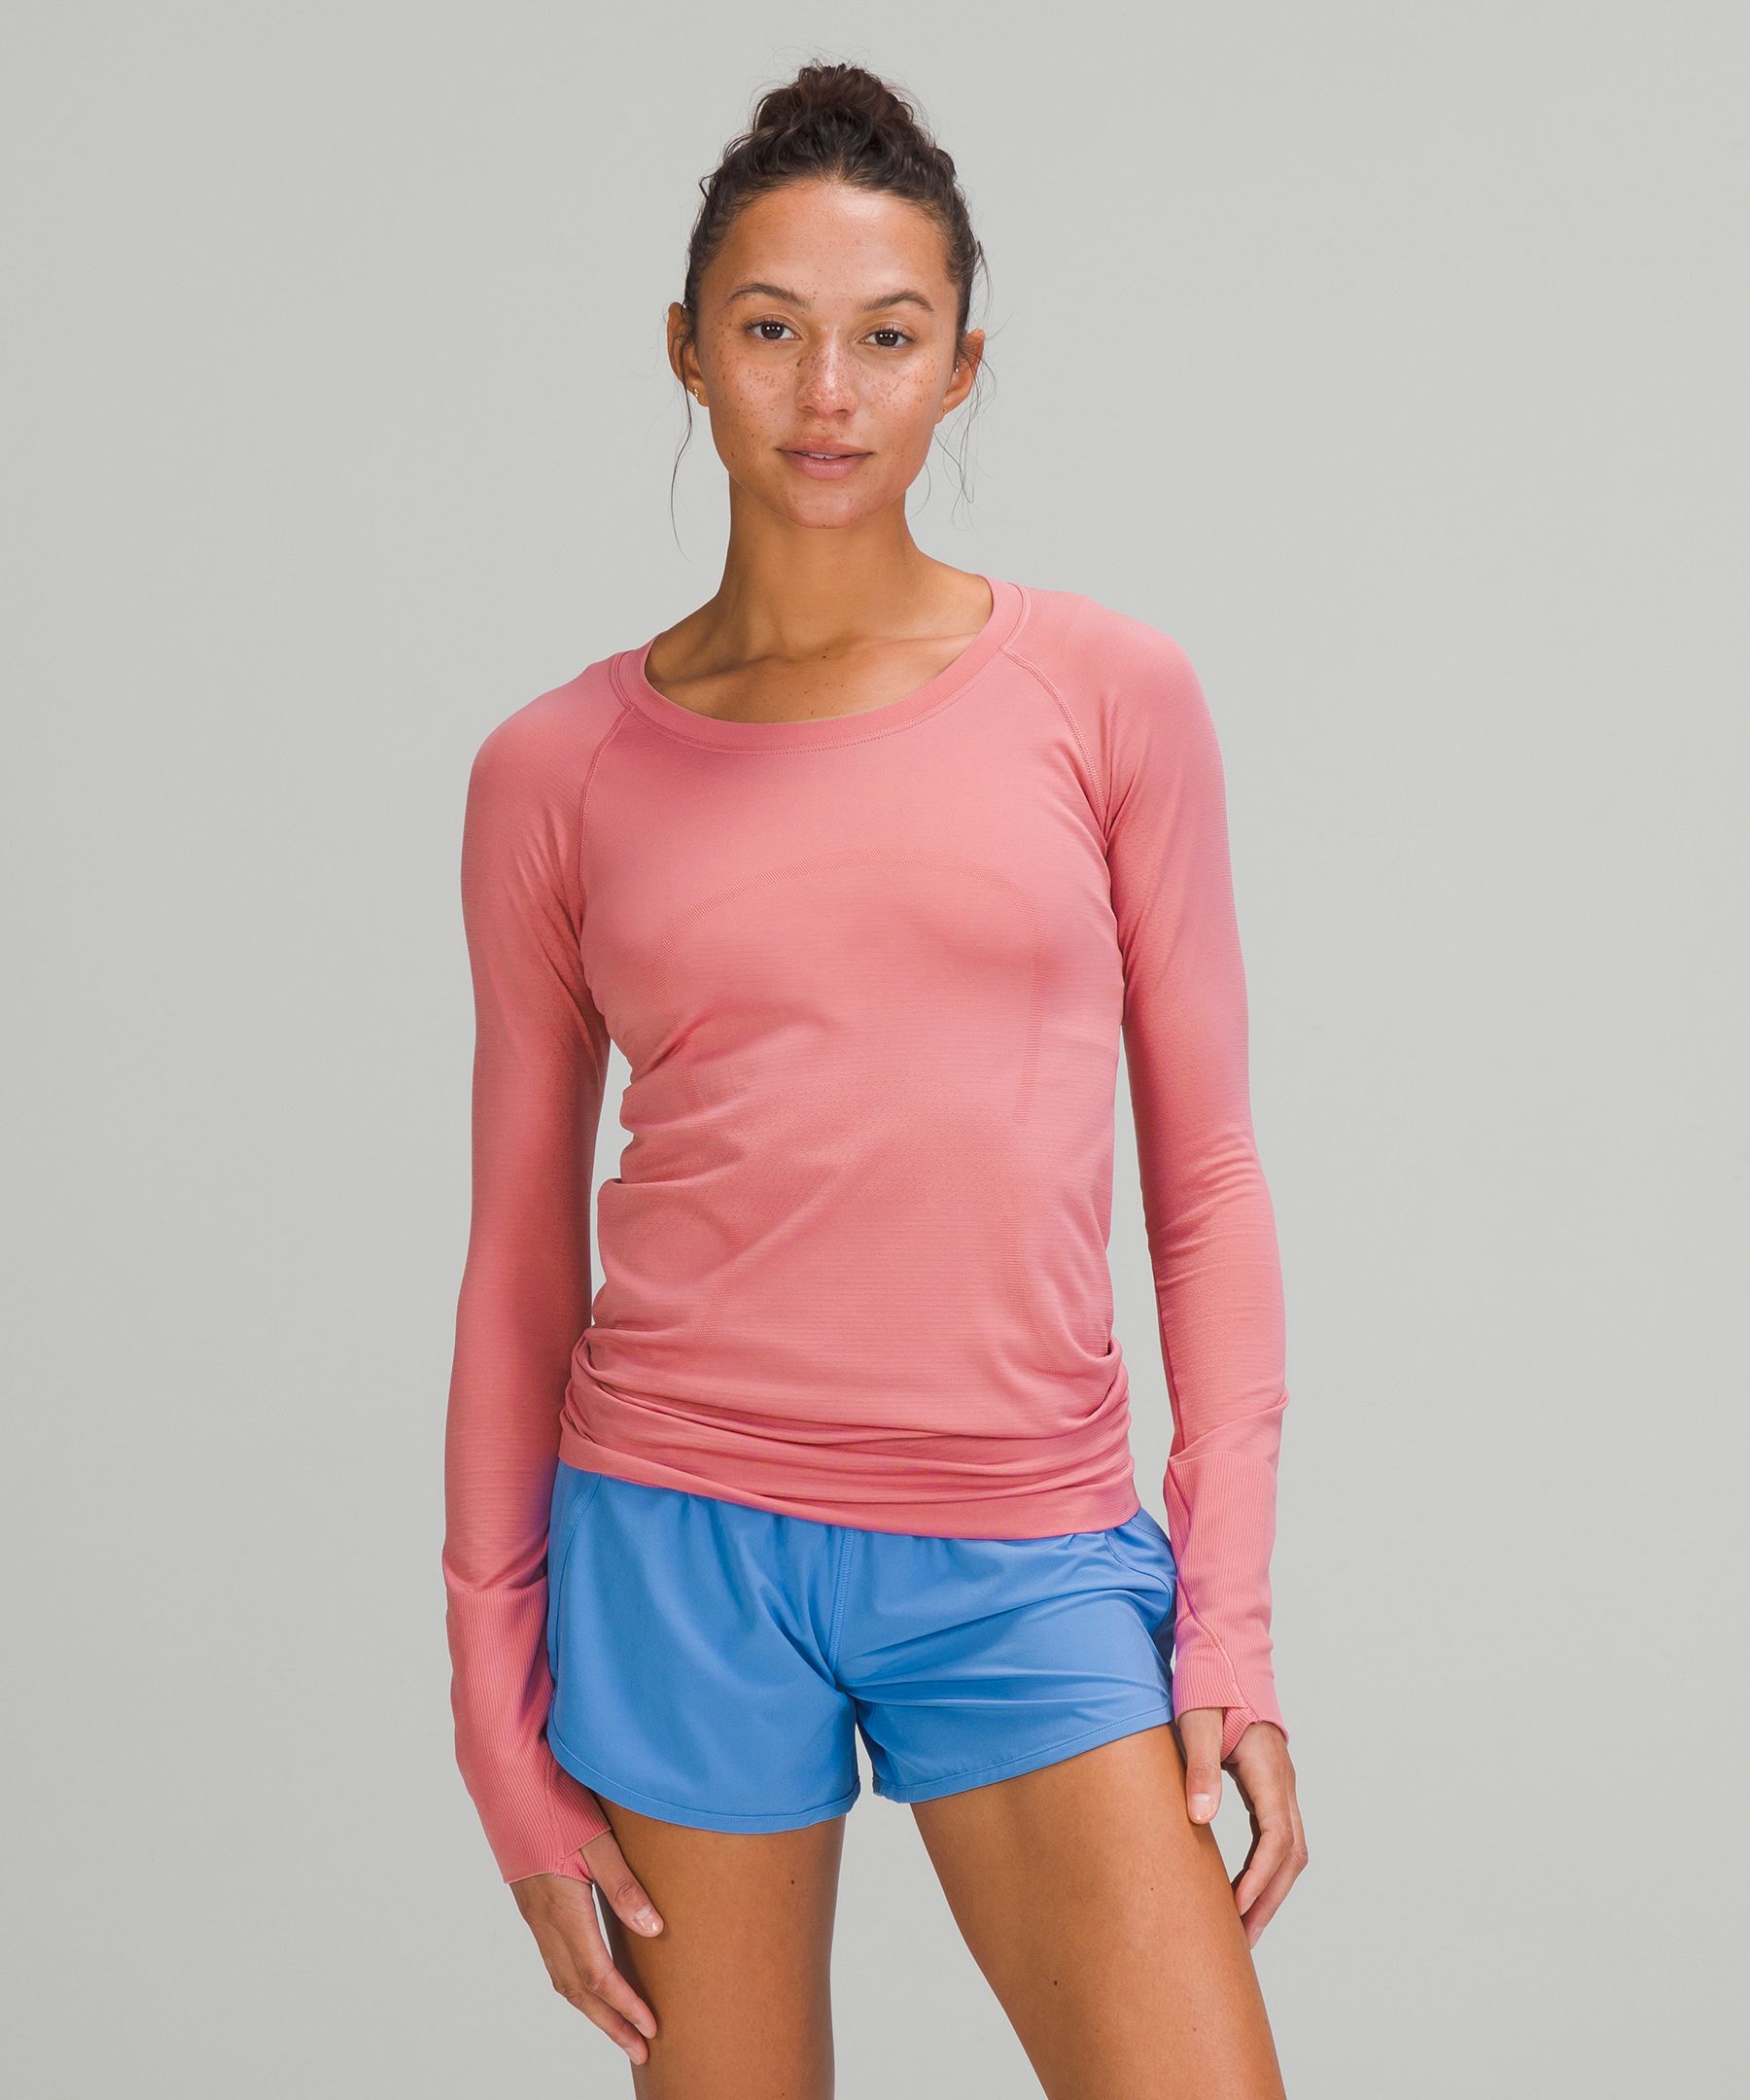 Lululemon Swiftly Tech Long Sleeve Shirt 2.0 In Pink Blossom/pink Blossom